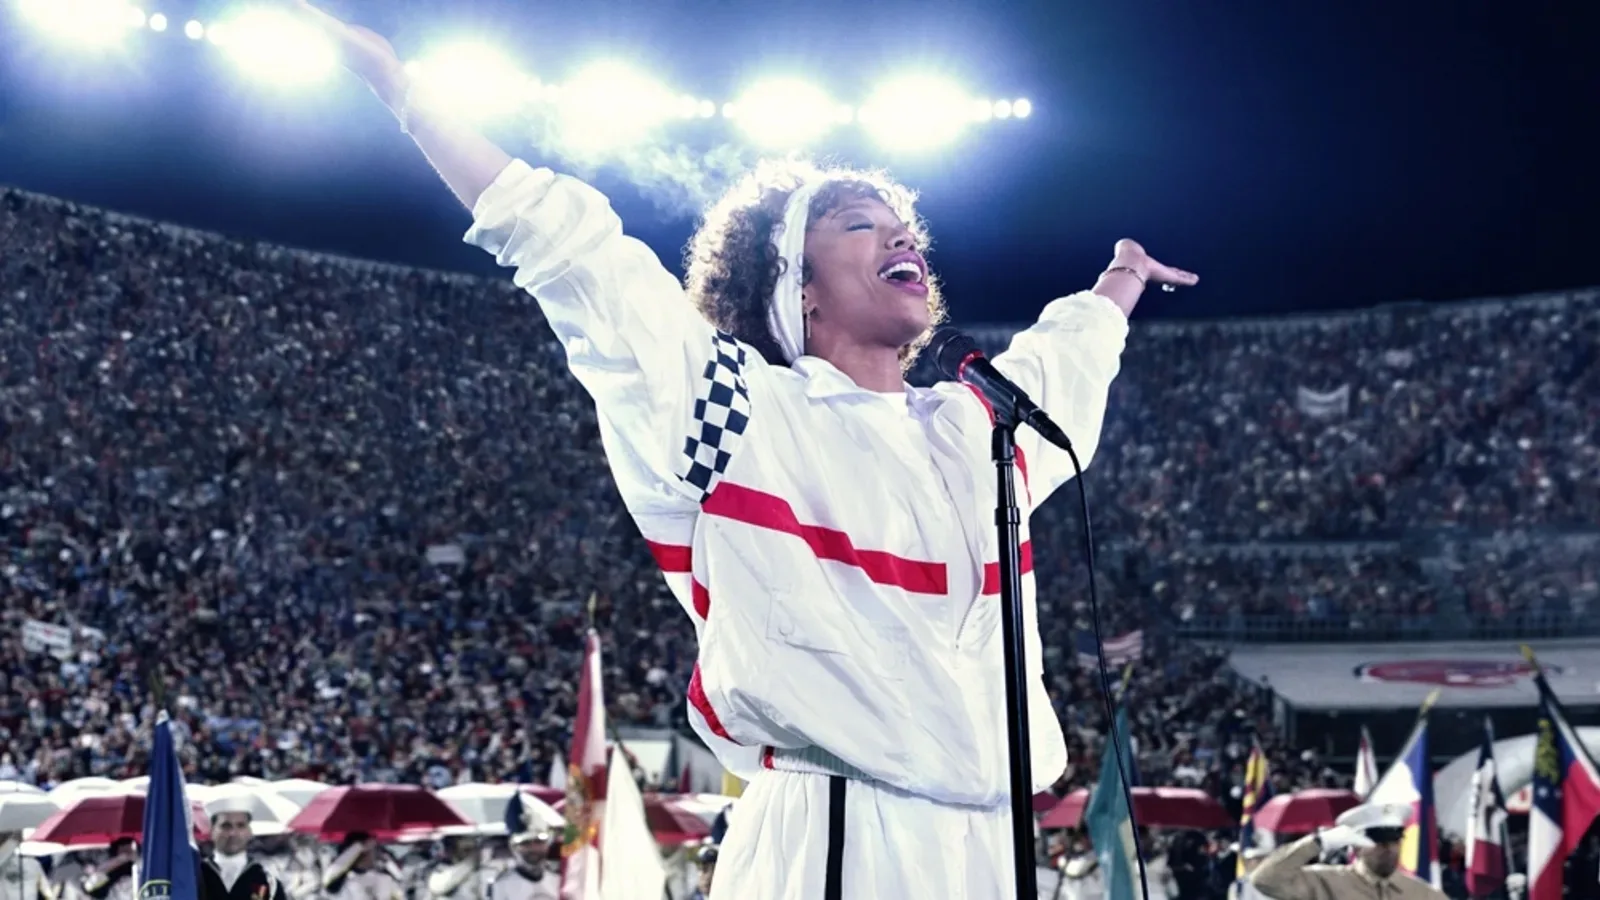 Whitney Houston (played by Naomi Ackie) performs her iconic performace of the National Anthem.